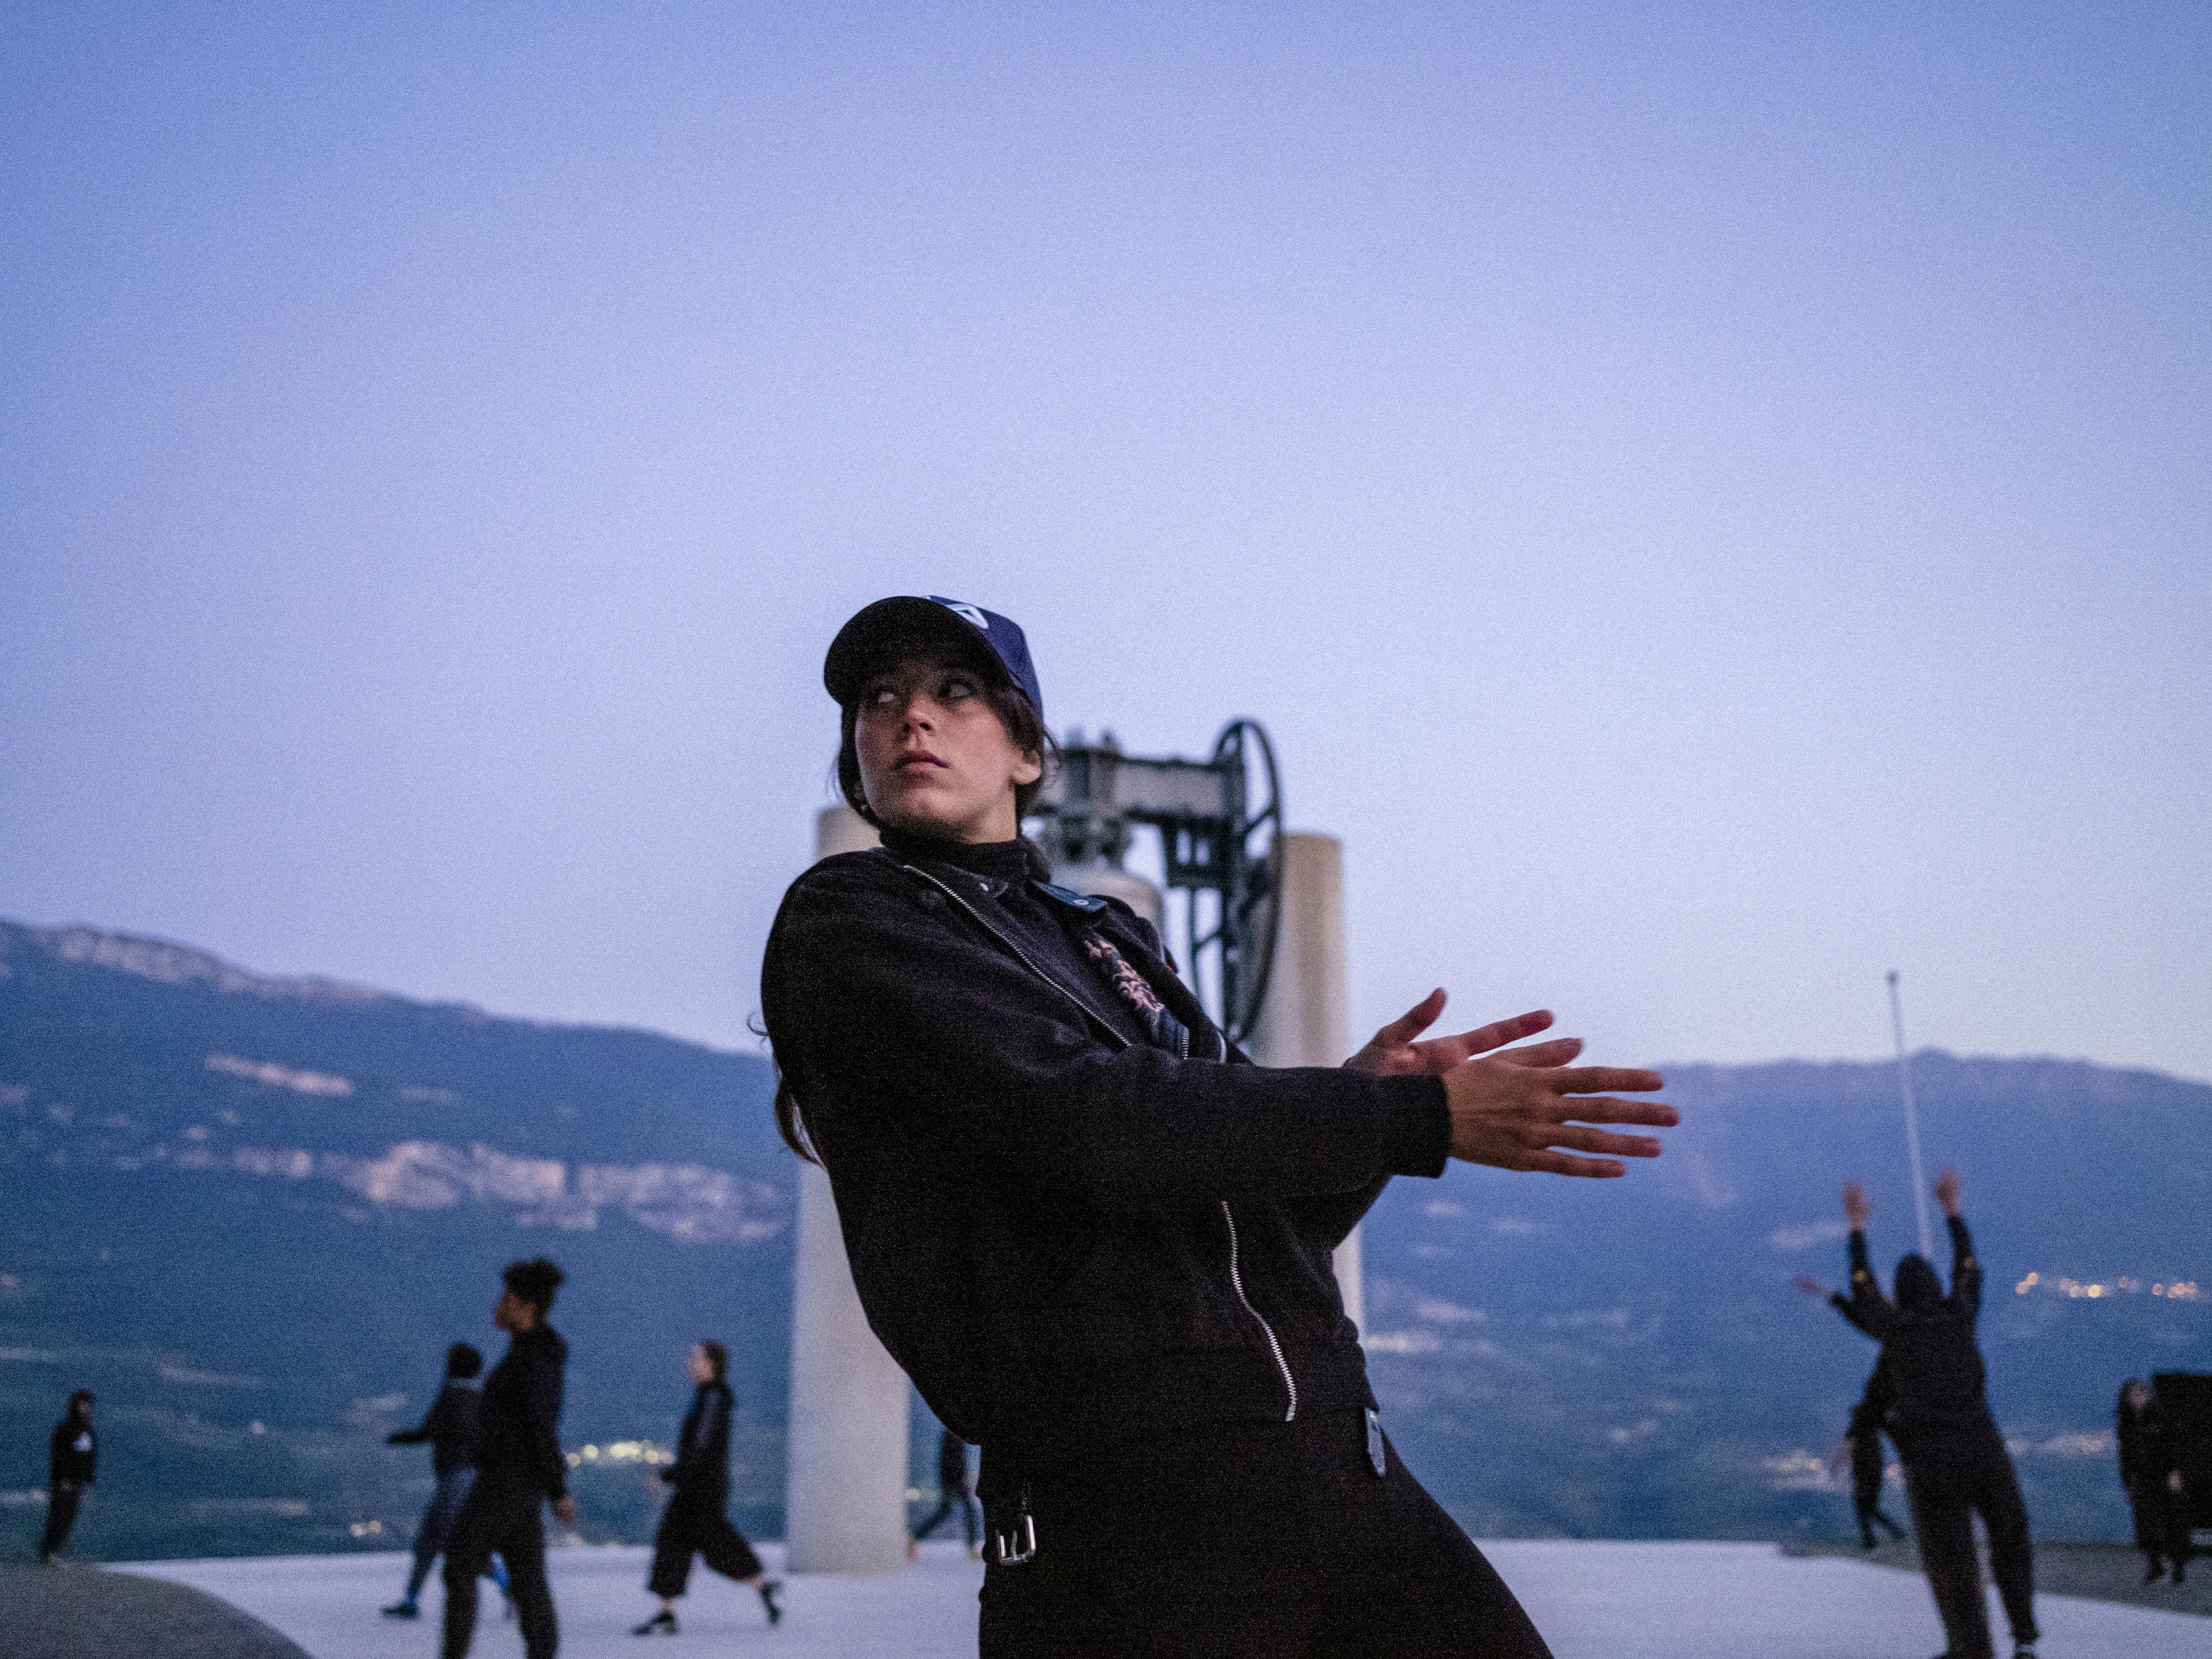 Some performers during Alessio Romano's show "Choros" at the Campana dei Caduti. In the foreground a young dancer dressed in black with a baseball cap. Her body is straight in a diagonal line backwards and she holds her hands palm to palm in front of her body